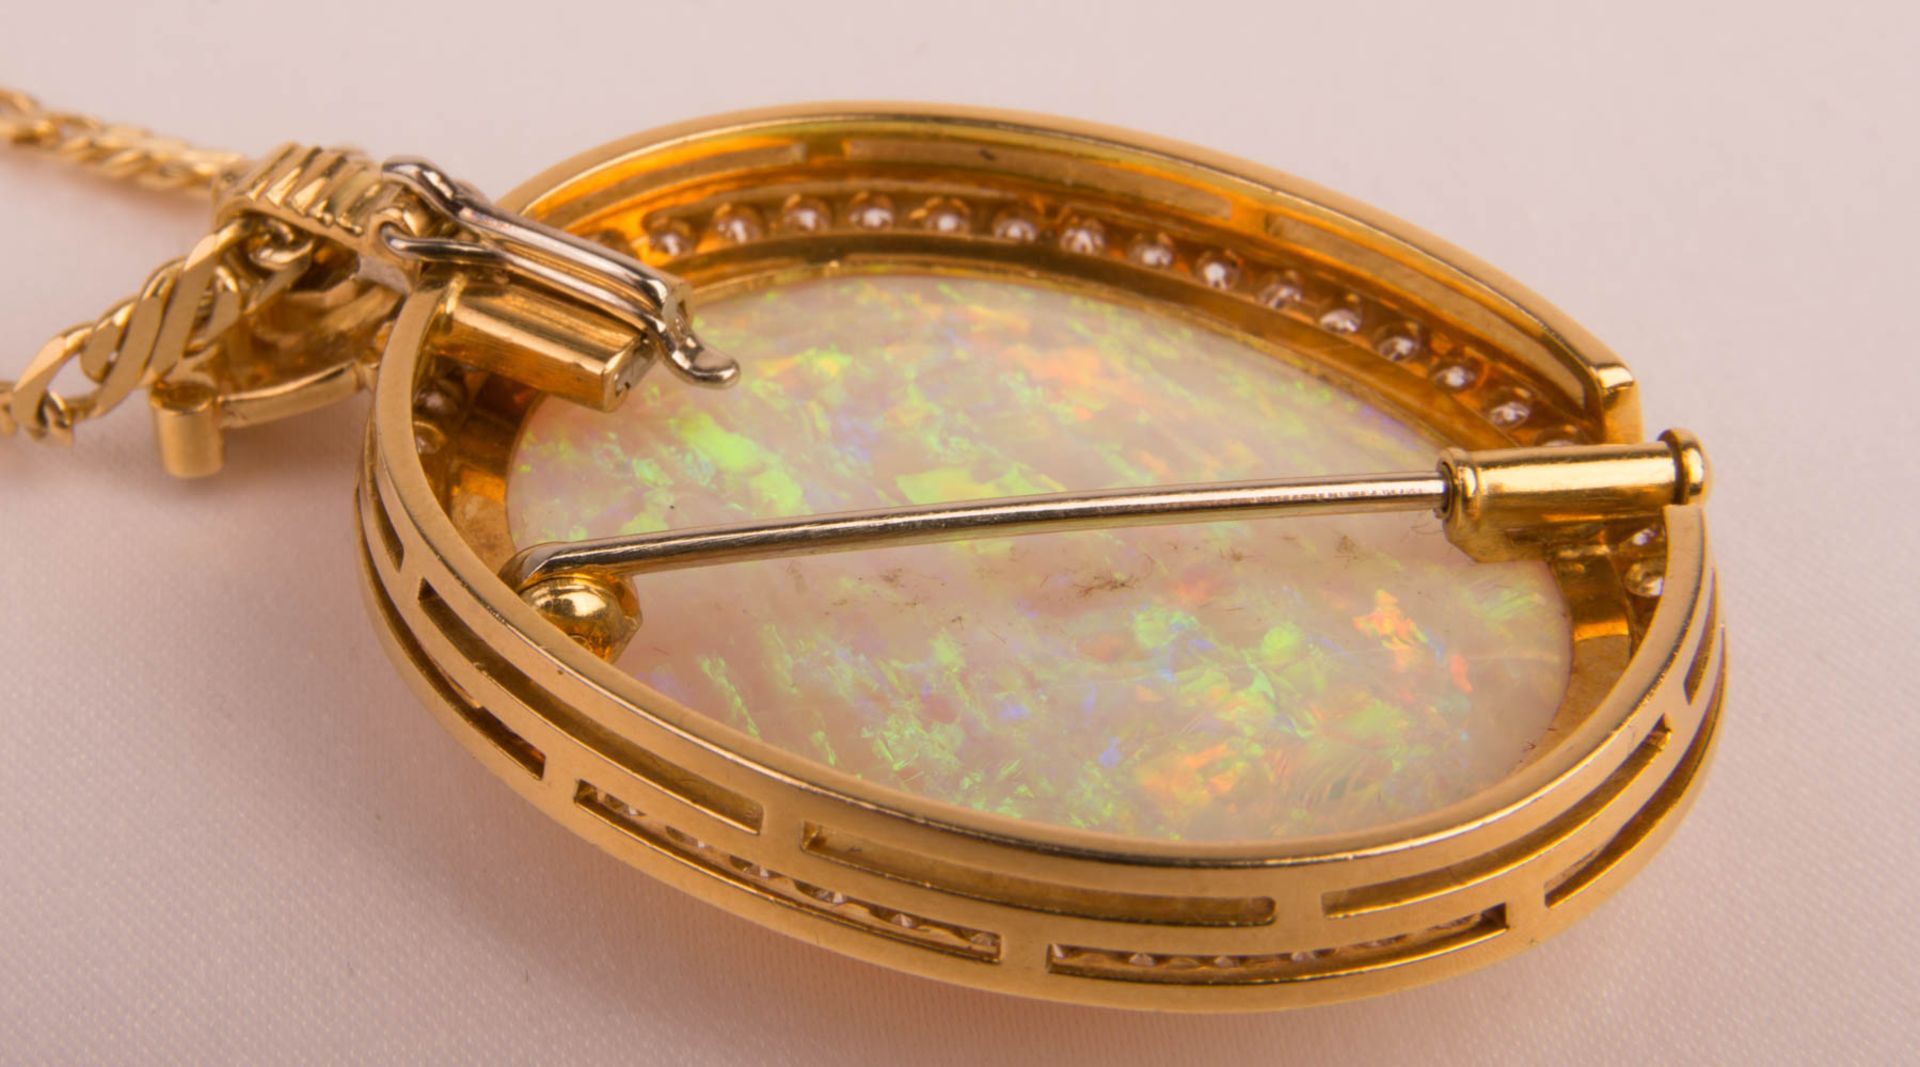 Necklace with large opal pendant, 750 yellow gold. - Image 5 of 6